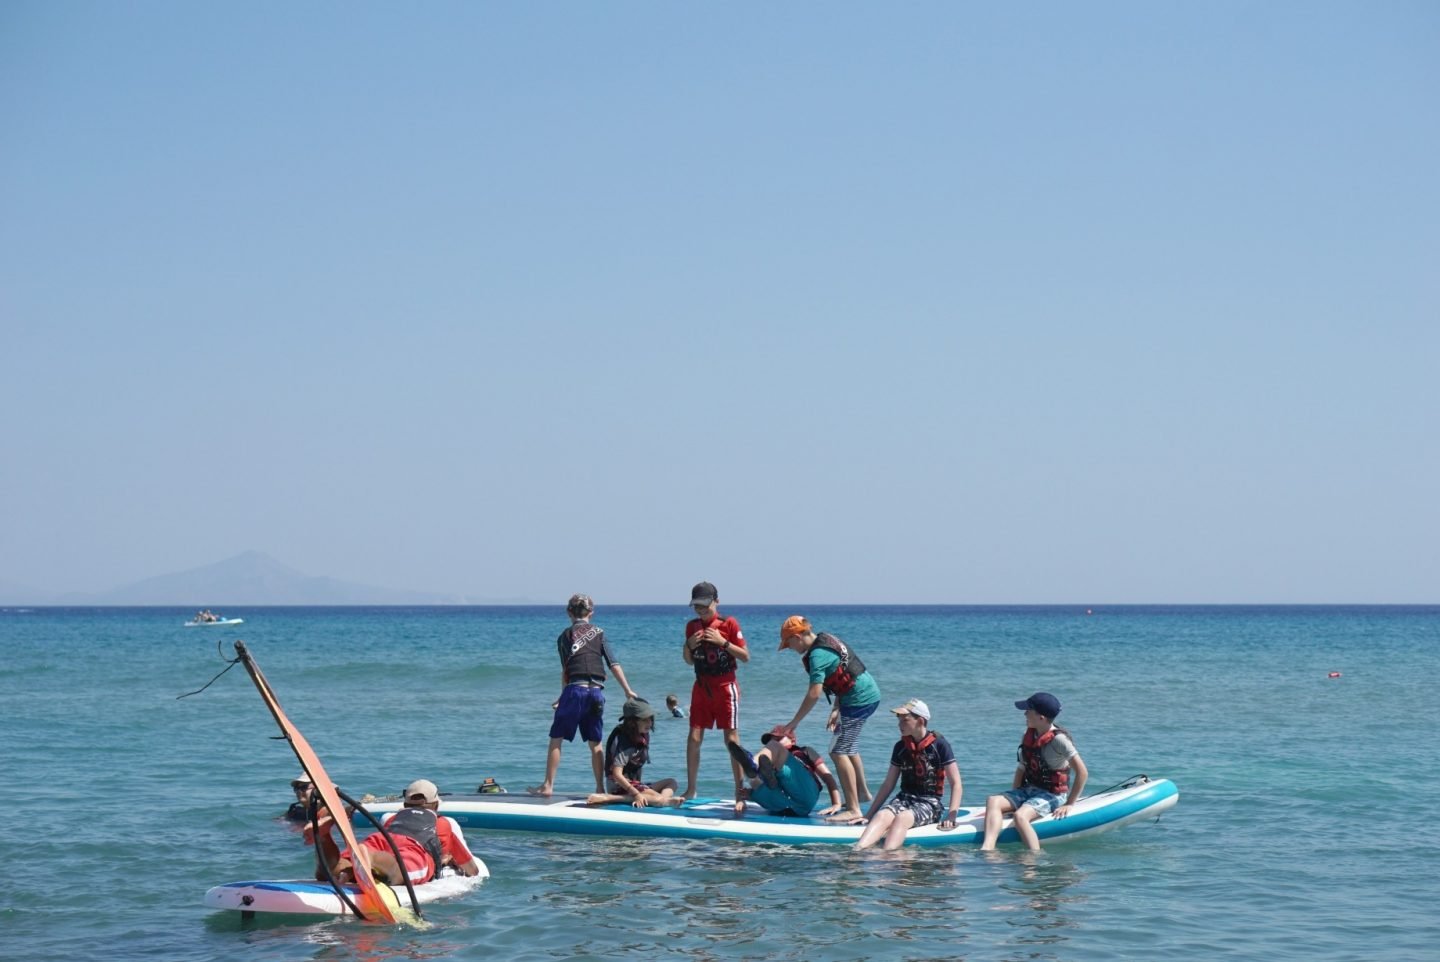 Learning to paddle board and windsurf in Greece for teens